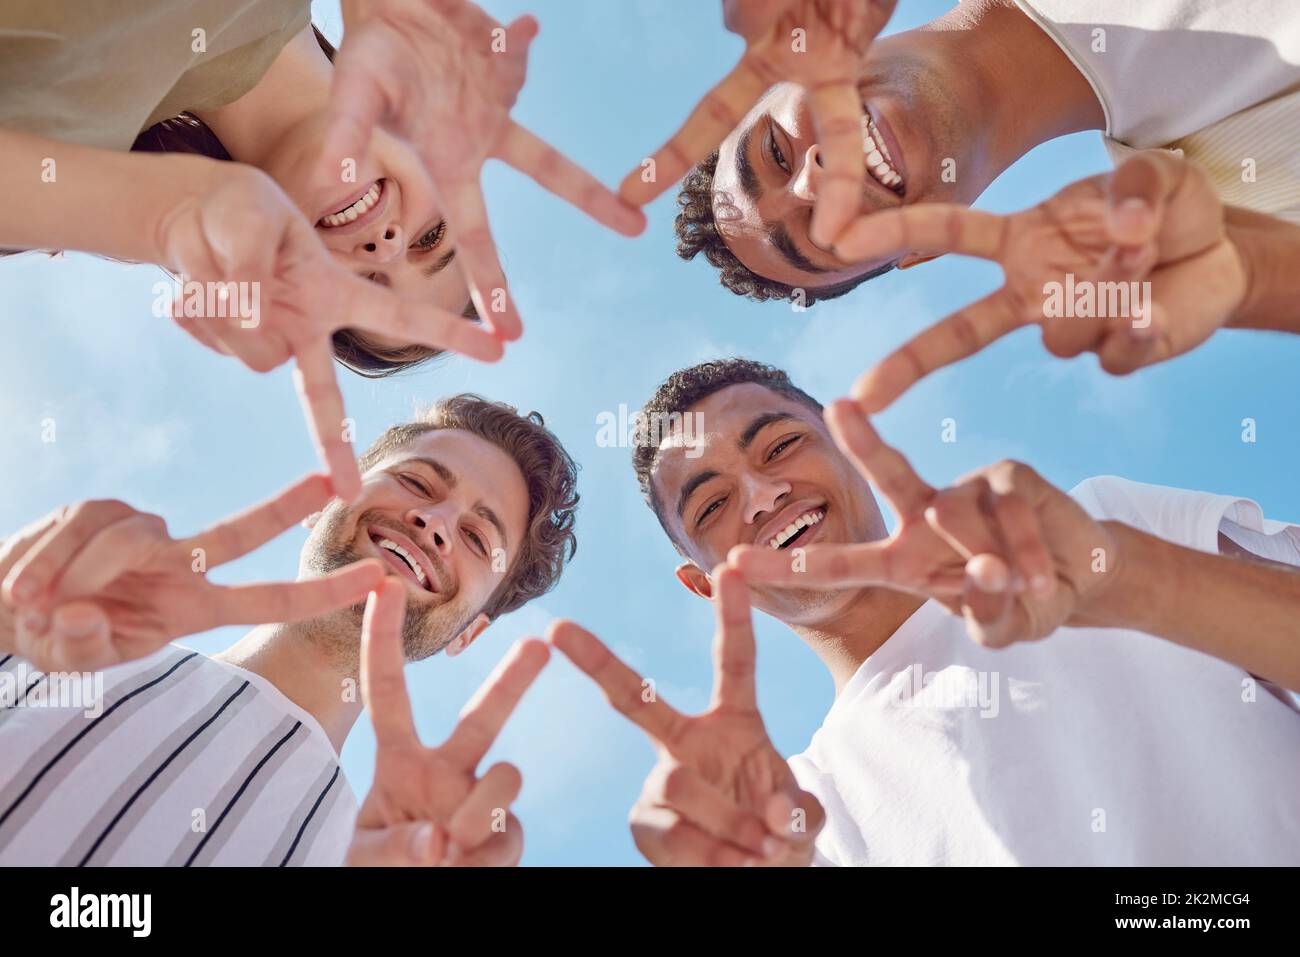 You shine brighter than a star. Shot of a group of young friends making a star shape with their hands outside. Stock Photo